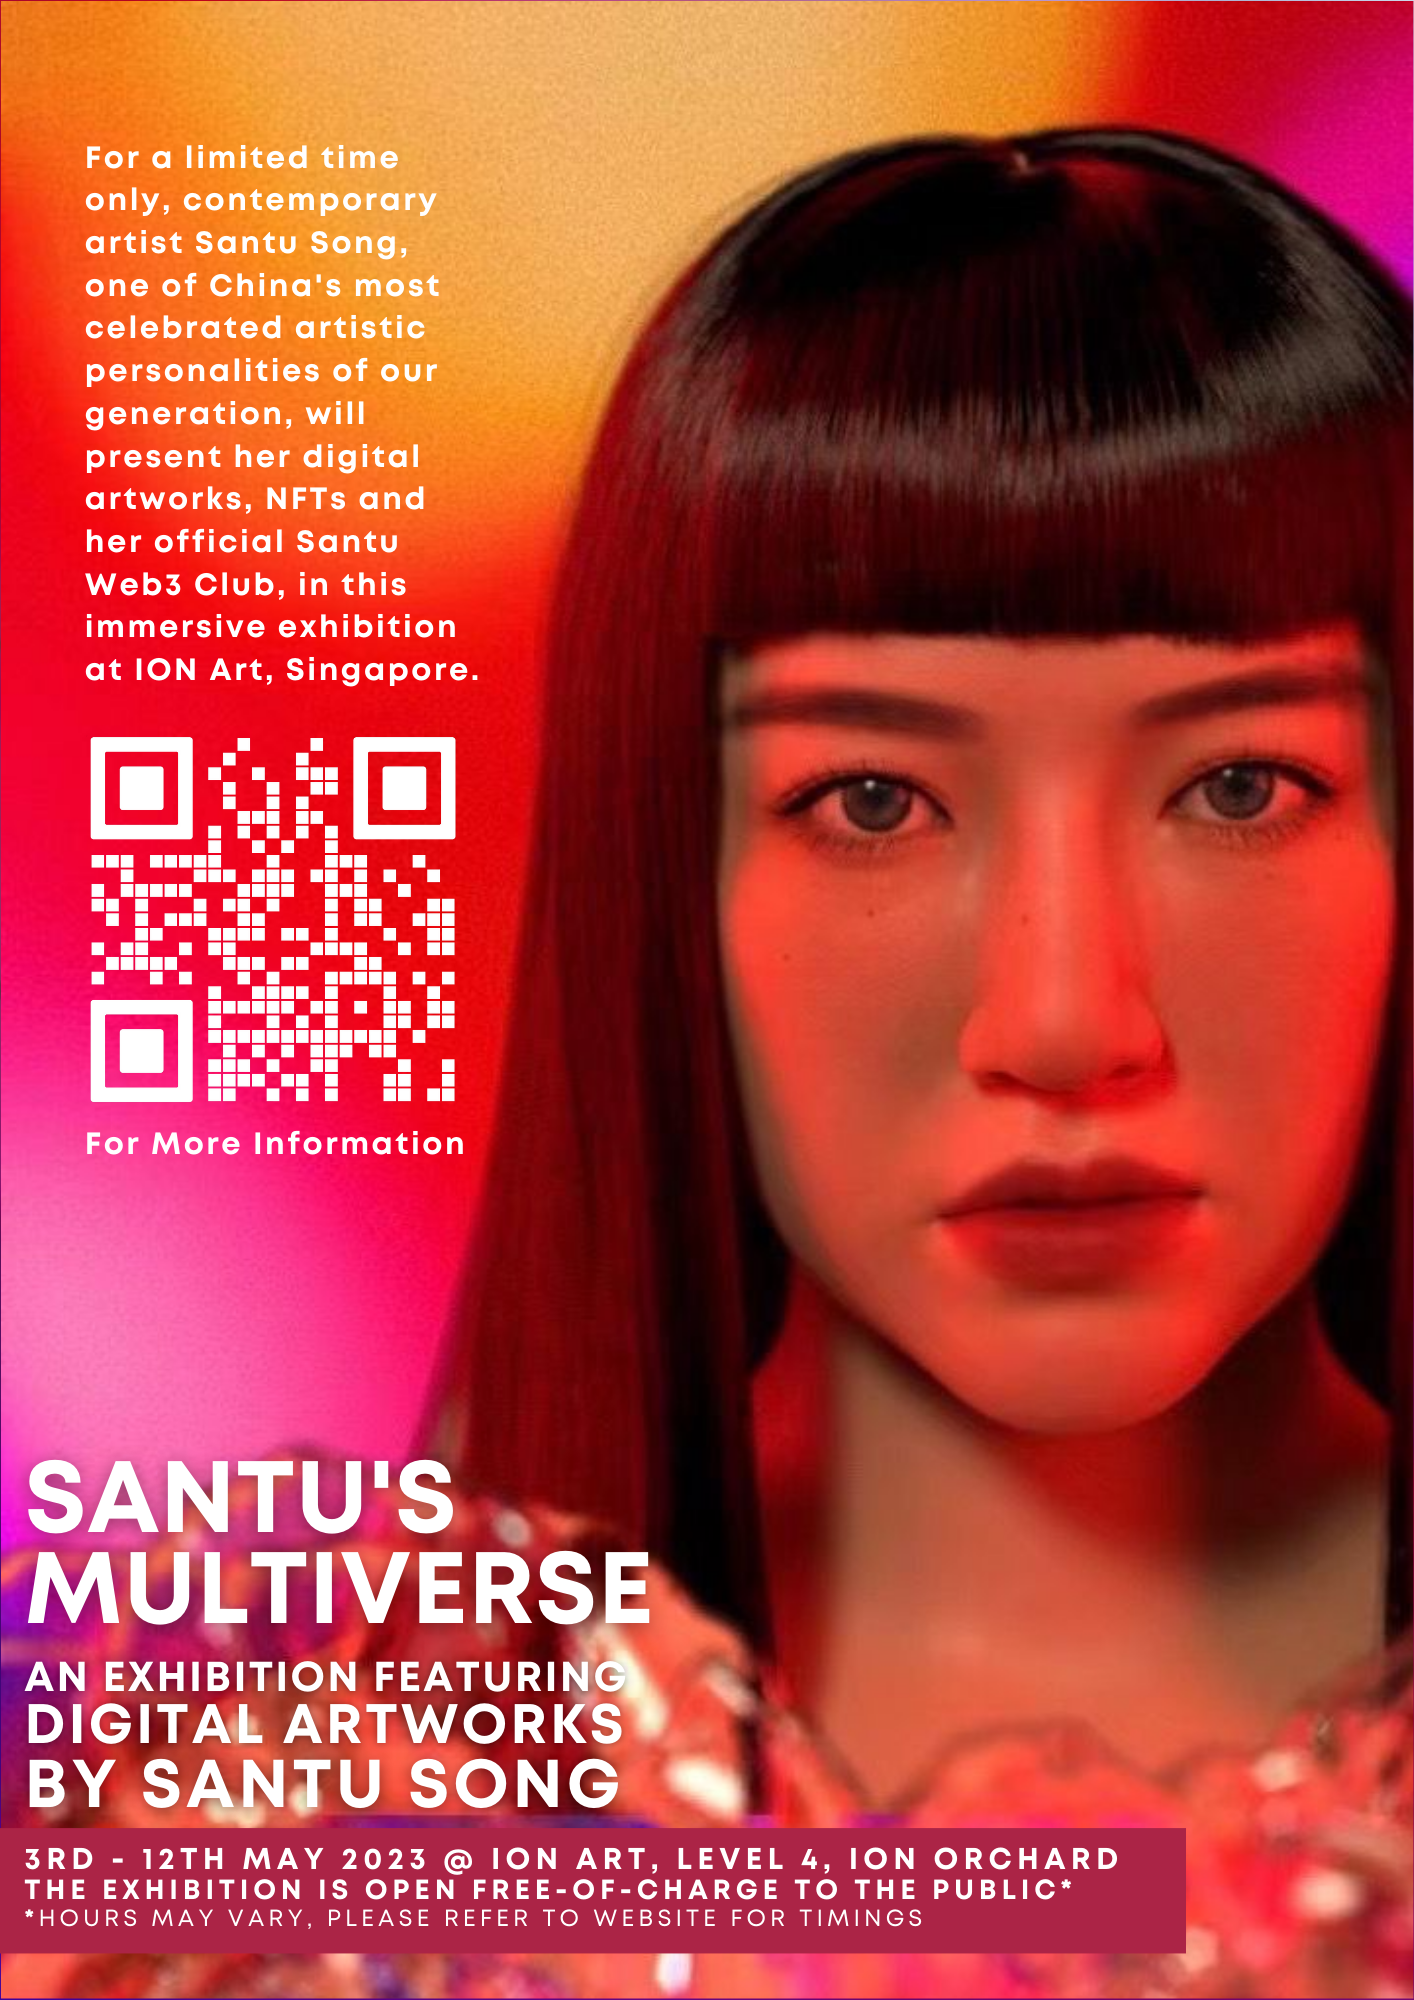 Santu’s Multiverse will be held from the 3rd to 12th of May 2023 at ION Art, Level 4, ION Orchard